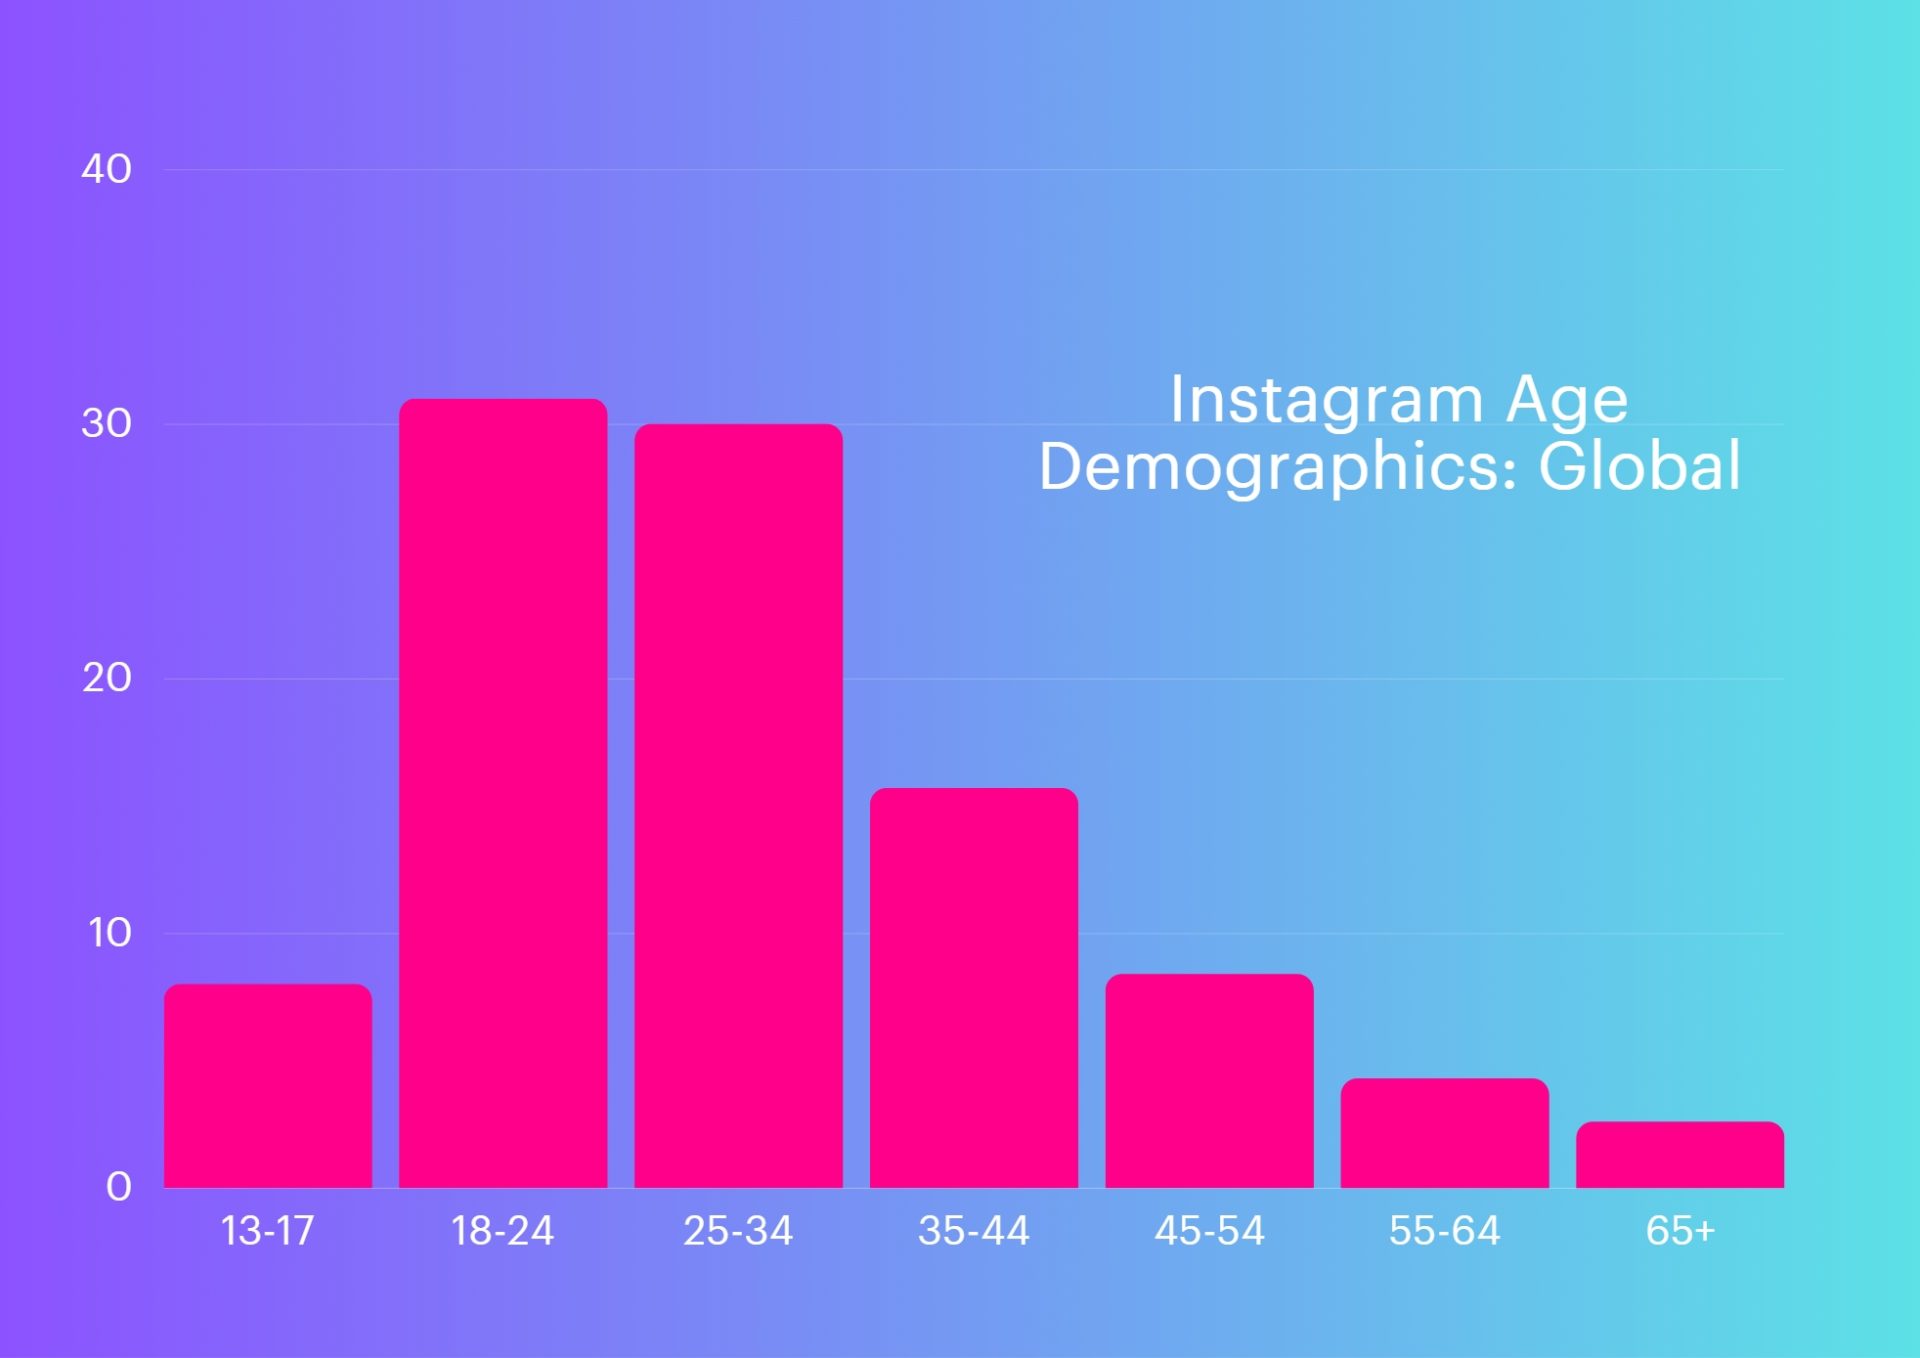 A bar chart depicting the global Instagram age demographics.